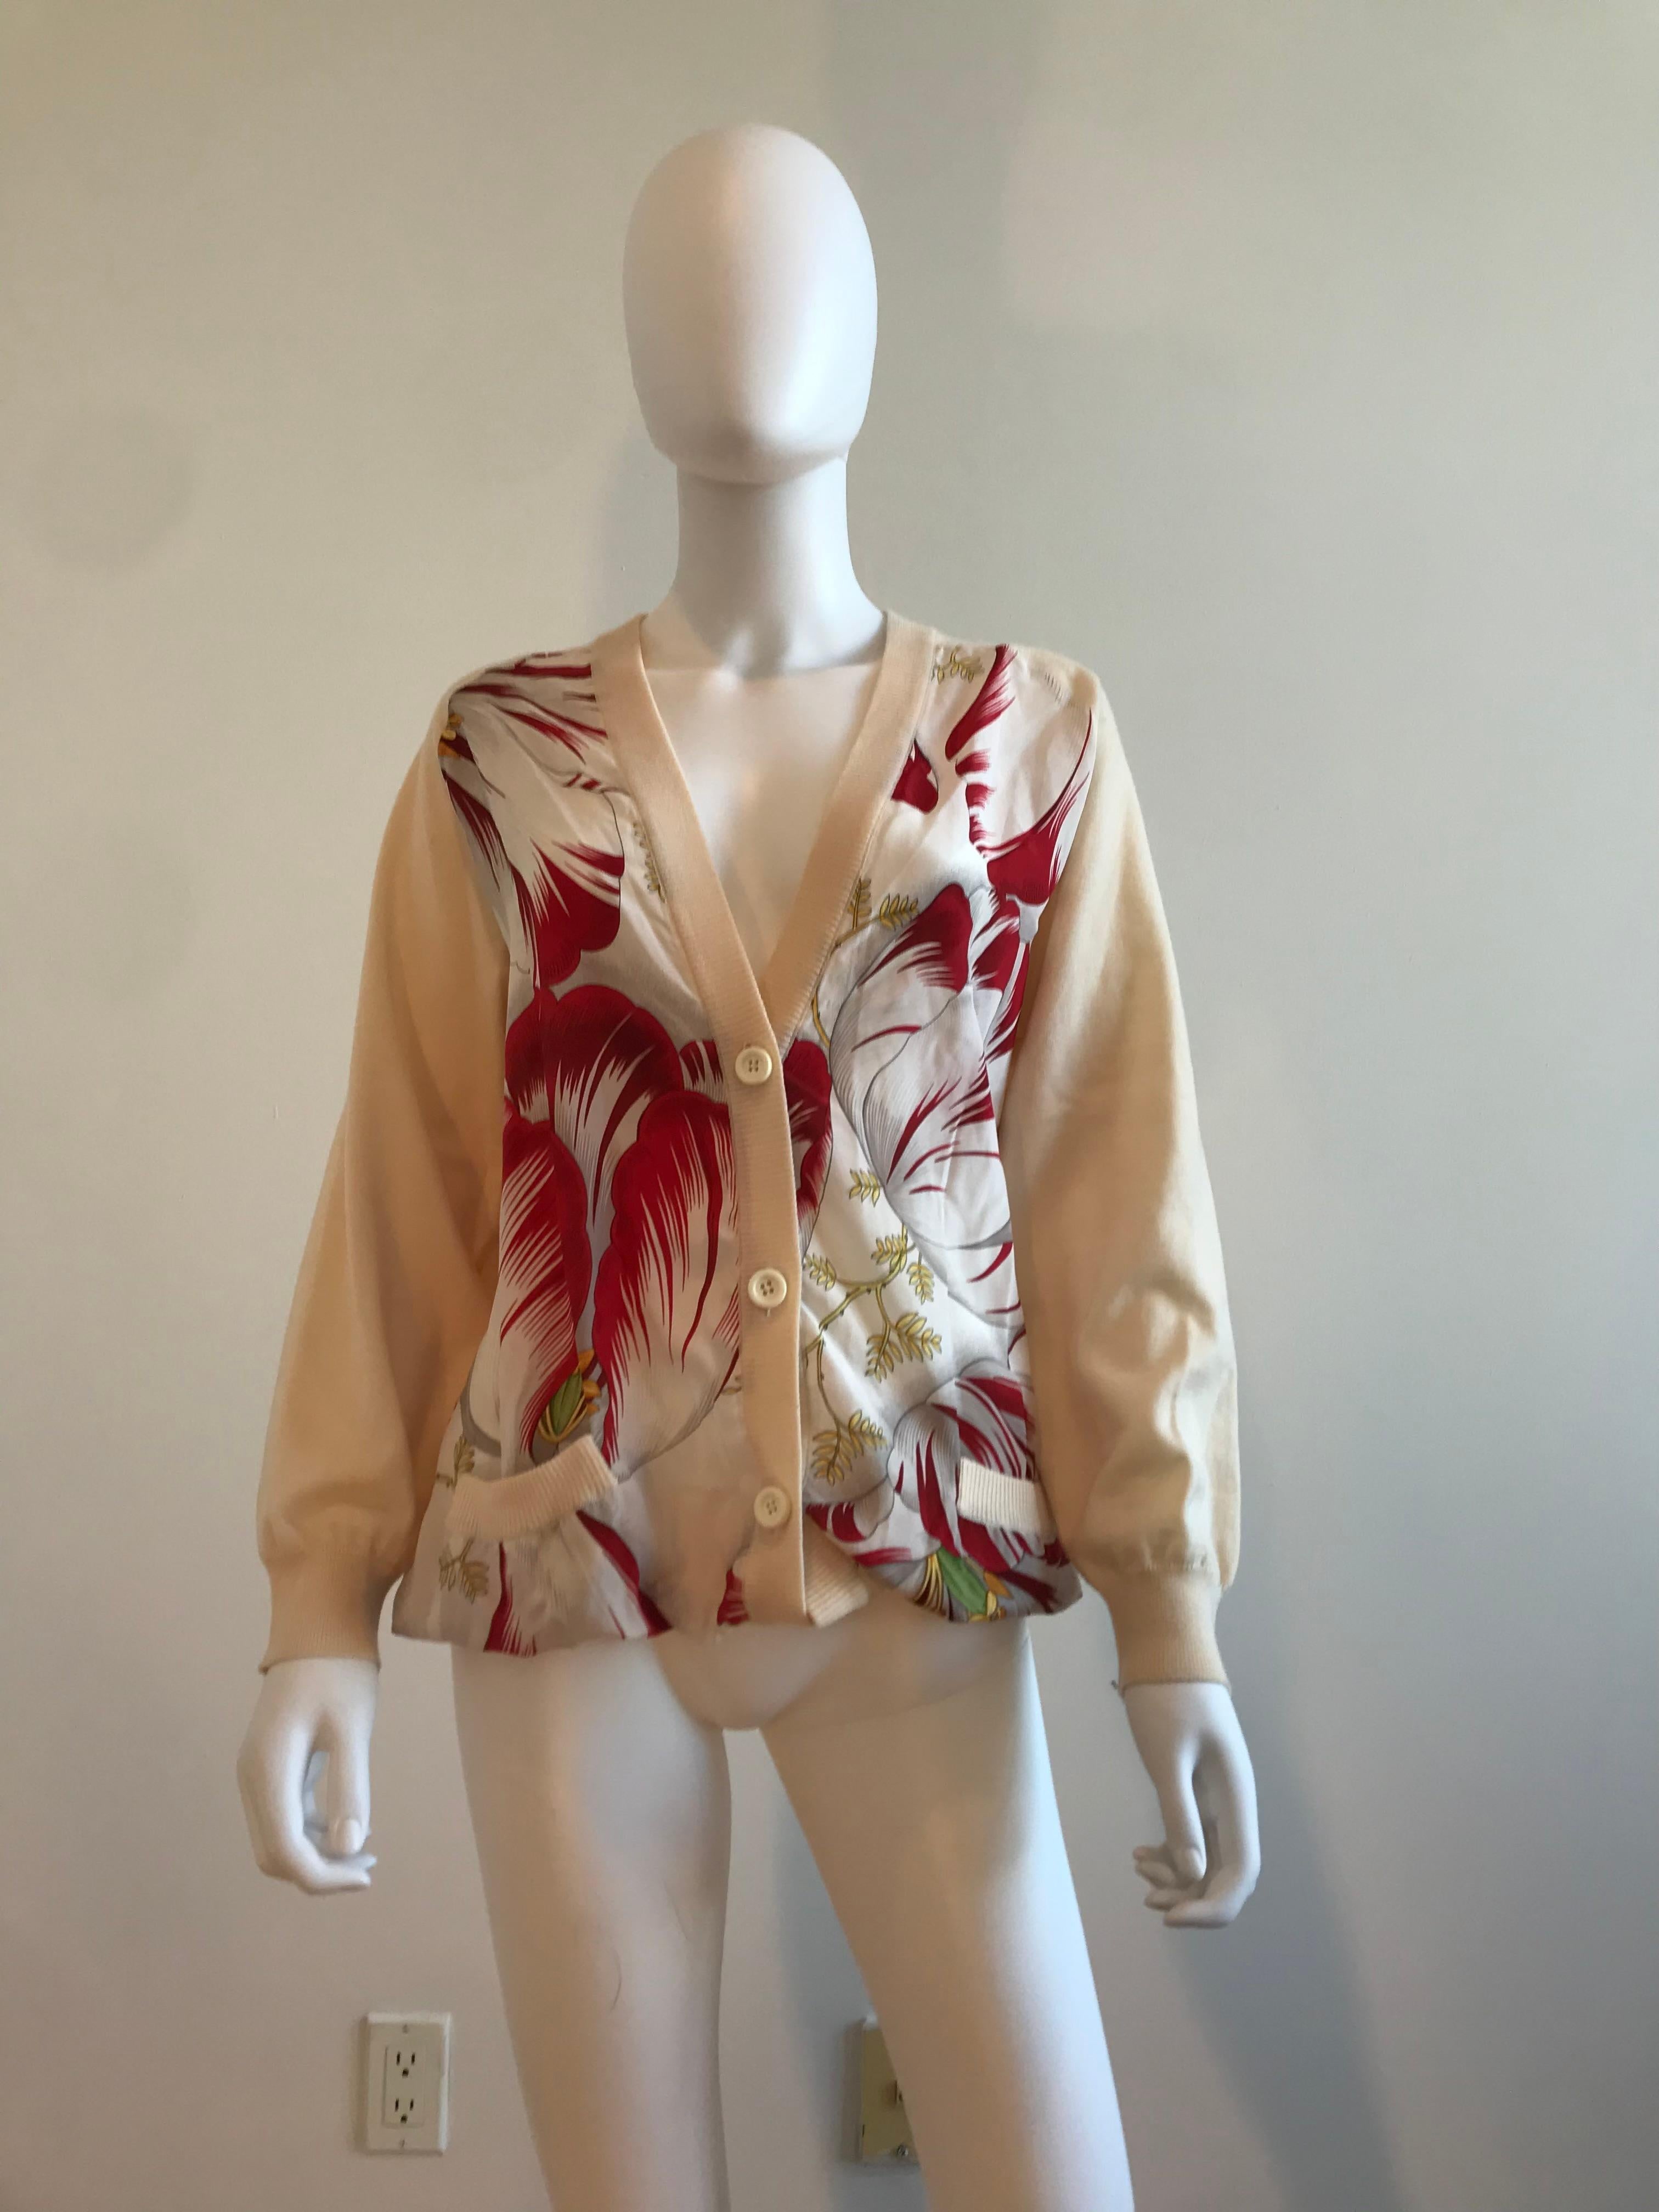 This vintage Salvatore Ferragamo cardigan sweater has front panels of printed silk in a tropical scarf print that includes flowers, leaves, and abstract floral prints with pale taupe wool knit fabric back, sleeves and trim.
Size